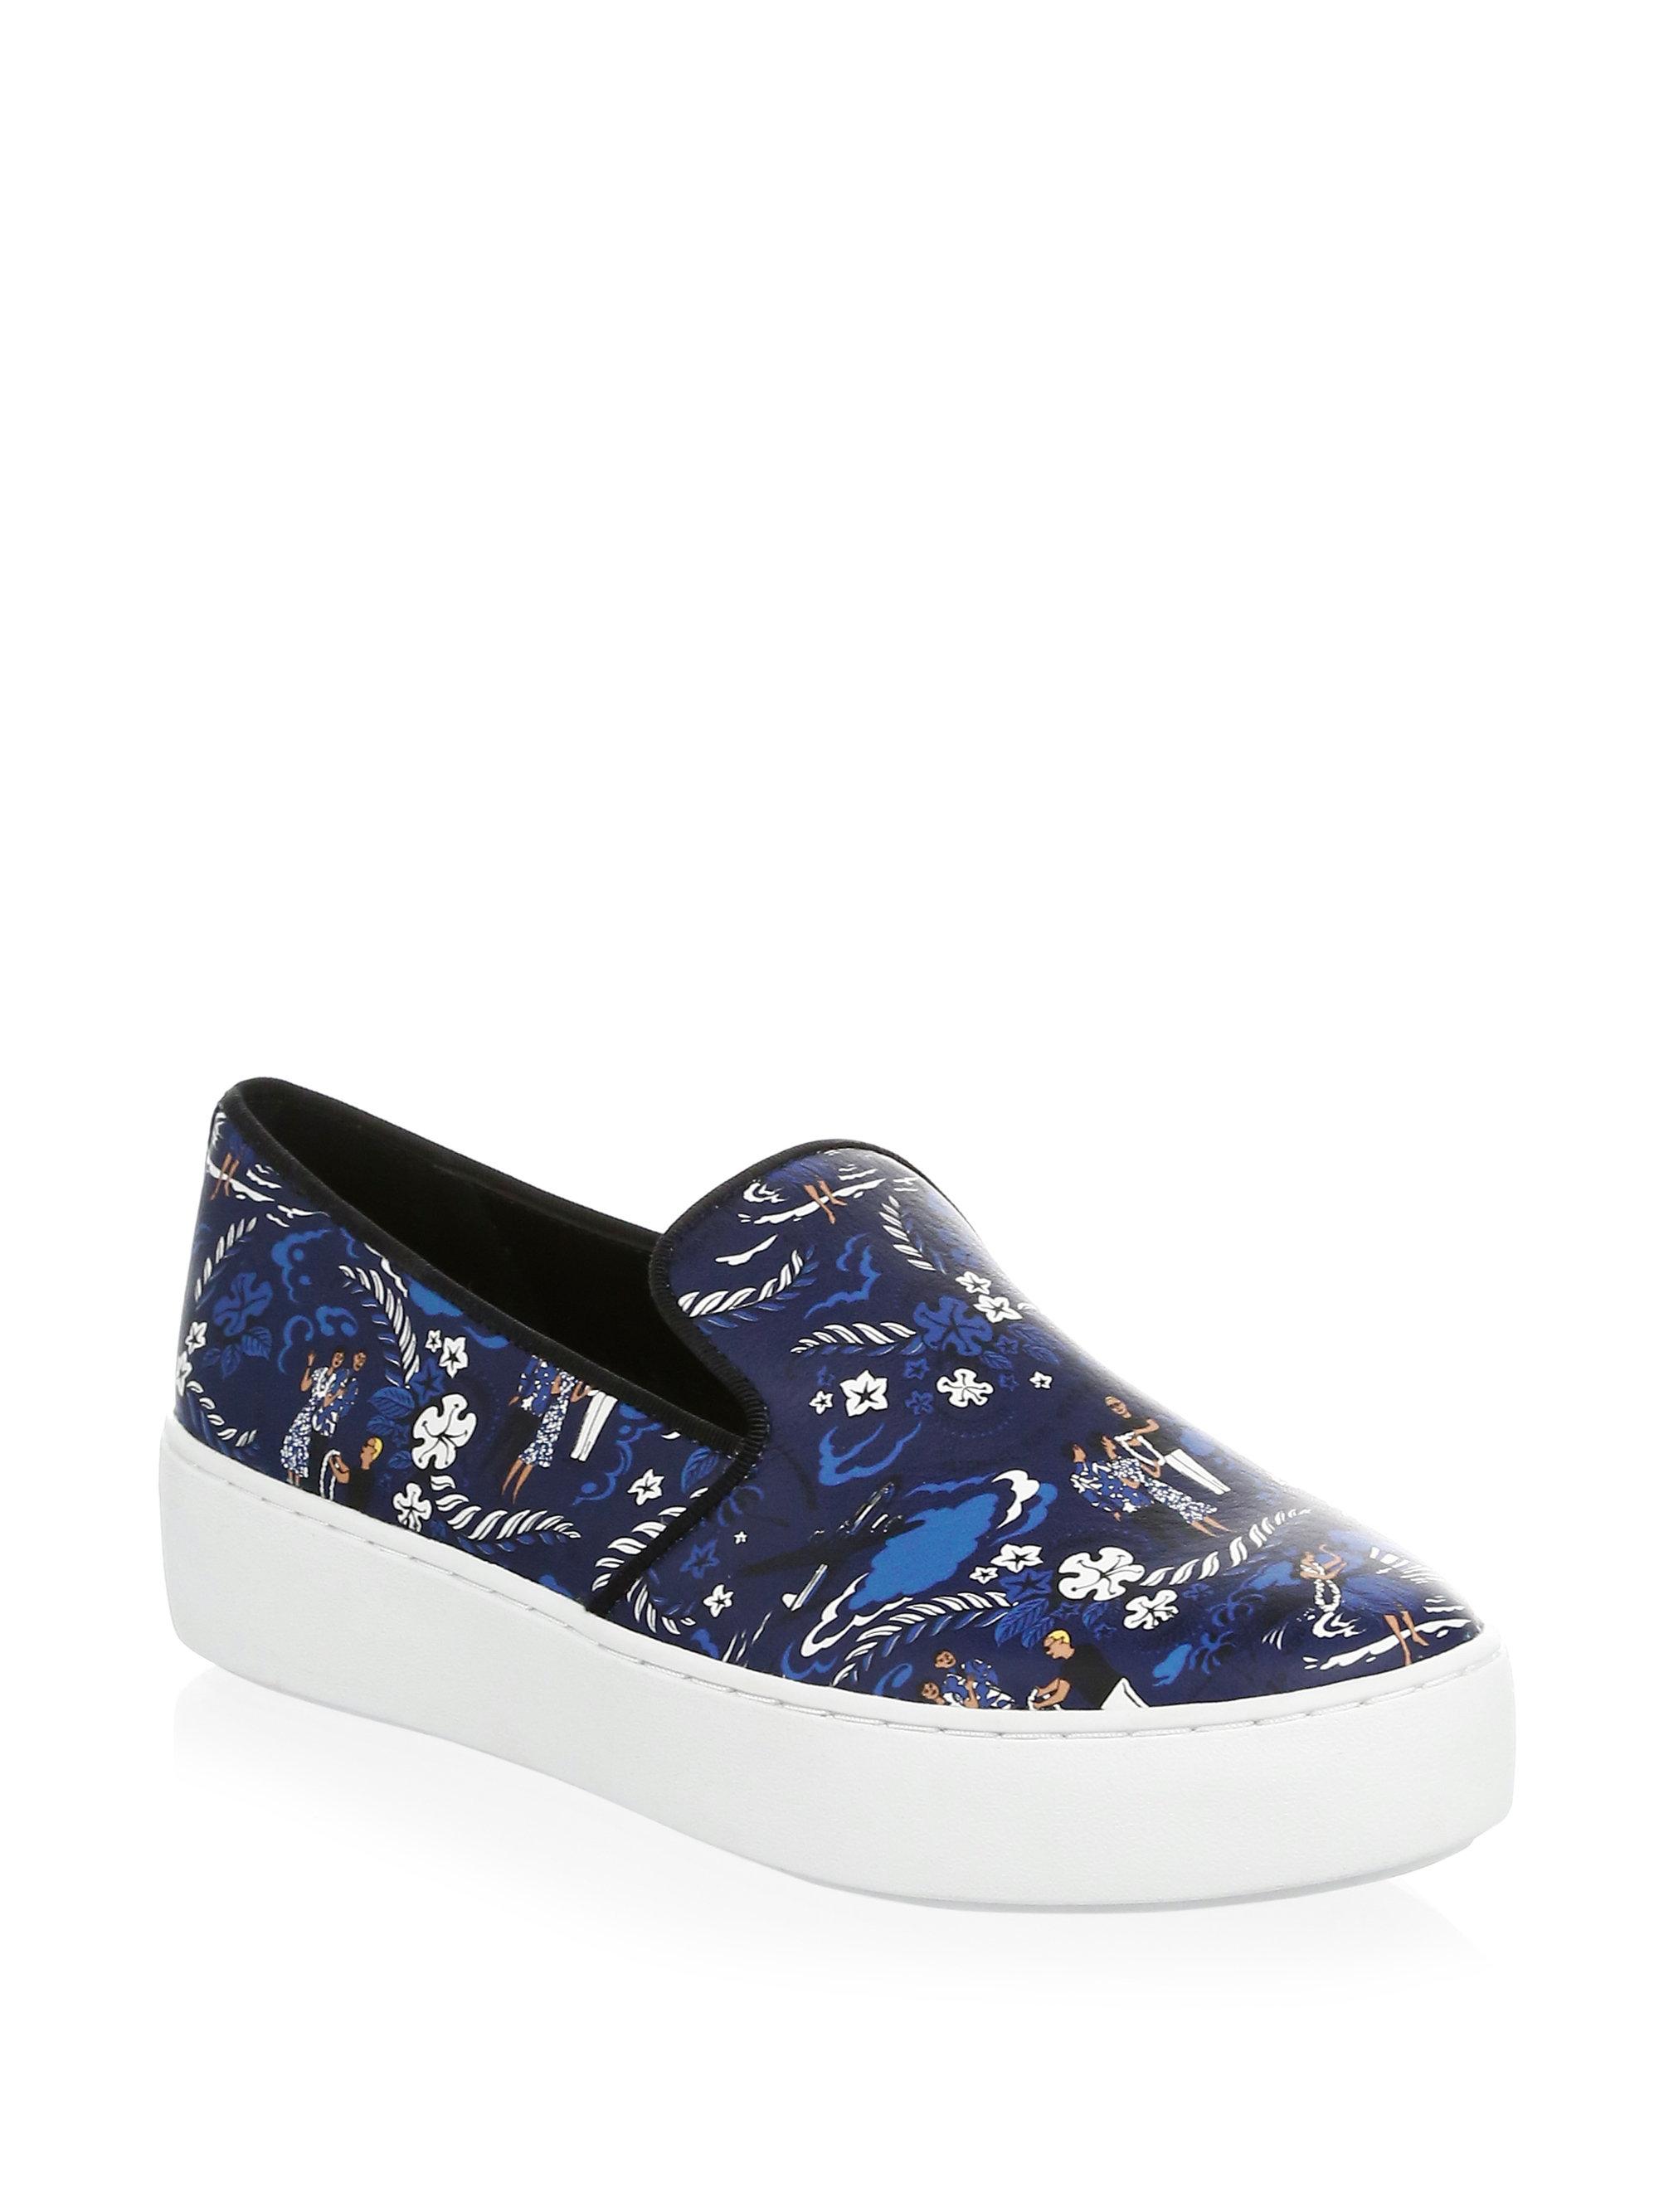 Michael Kors Leather Slip-on Sneakers in Sapphire (Blue) - Lyst